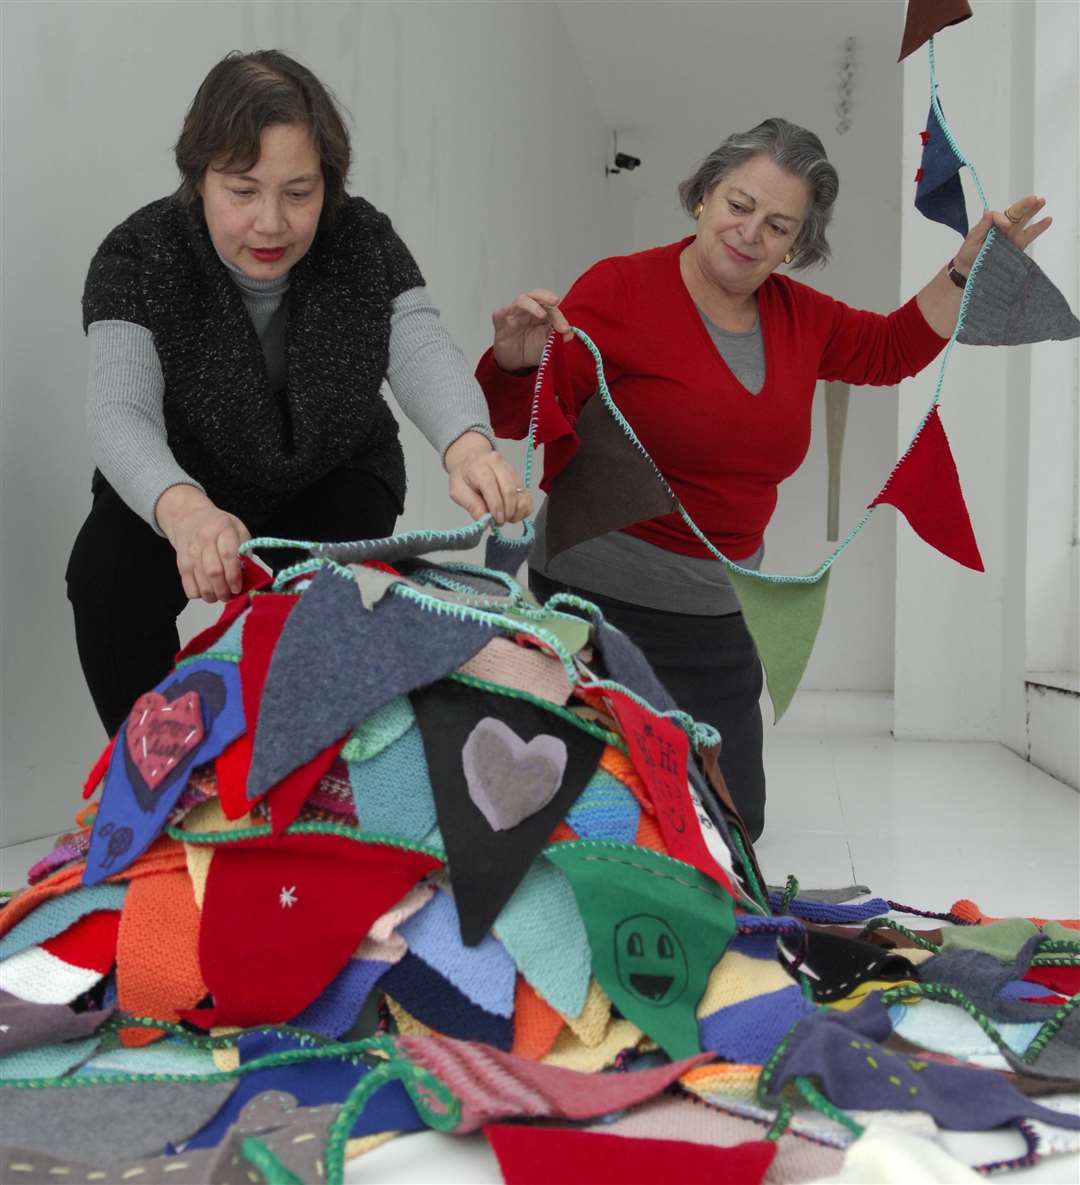 Clare Smith, left, and Joanna Jones, of DAD, initiating community workshops to create one mile of bunting to hang in the town to welcome the Olympic Torch for the London 2012 Games.